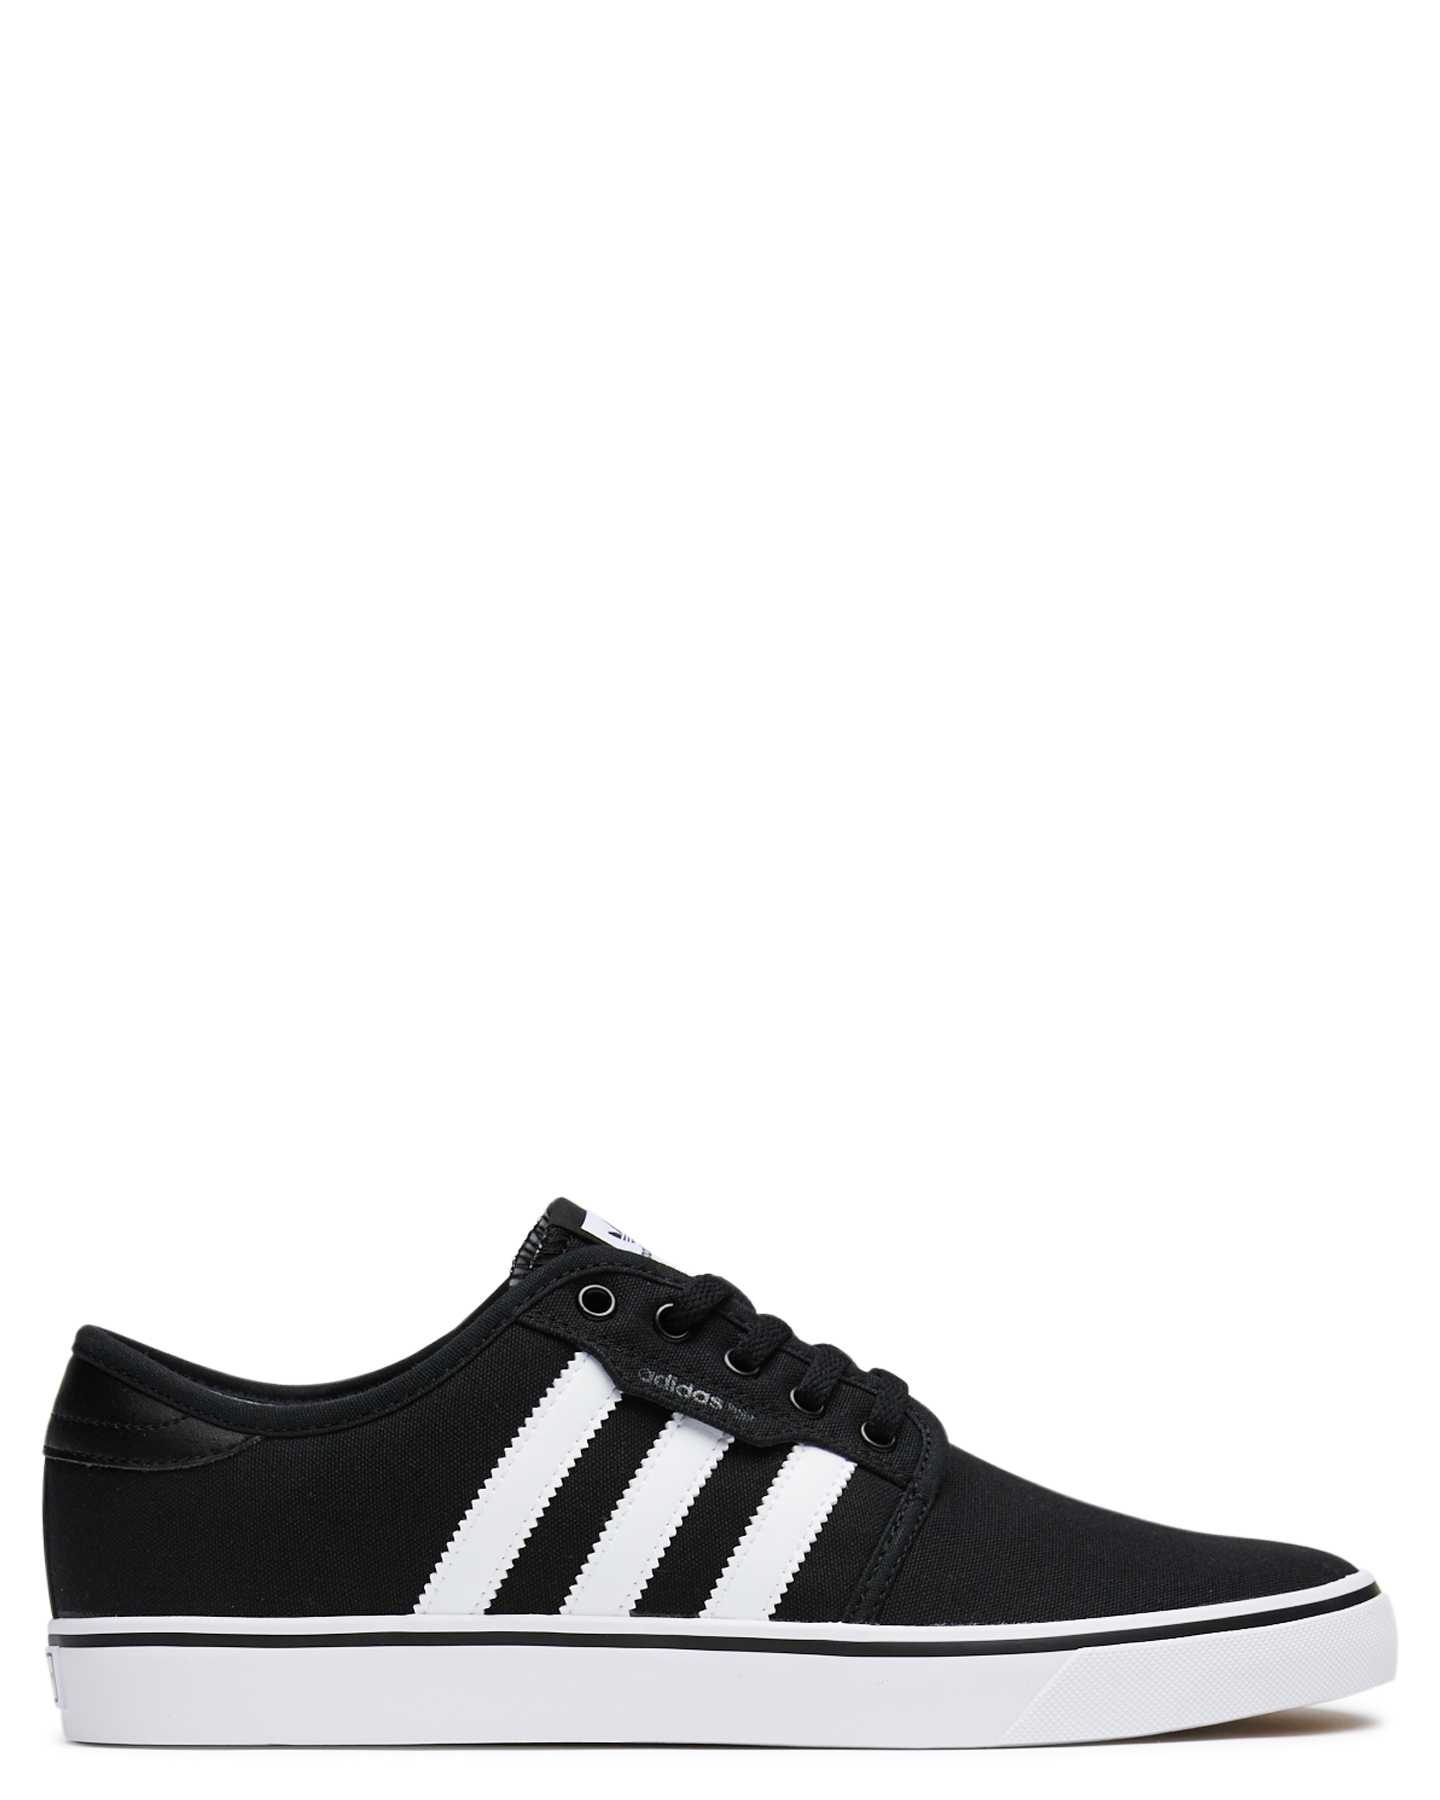 adidas seeley shoes